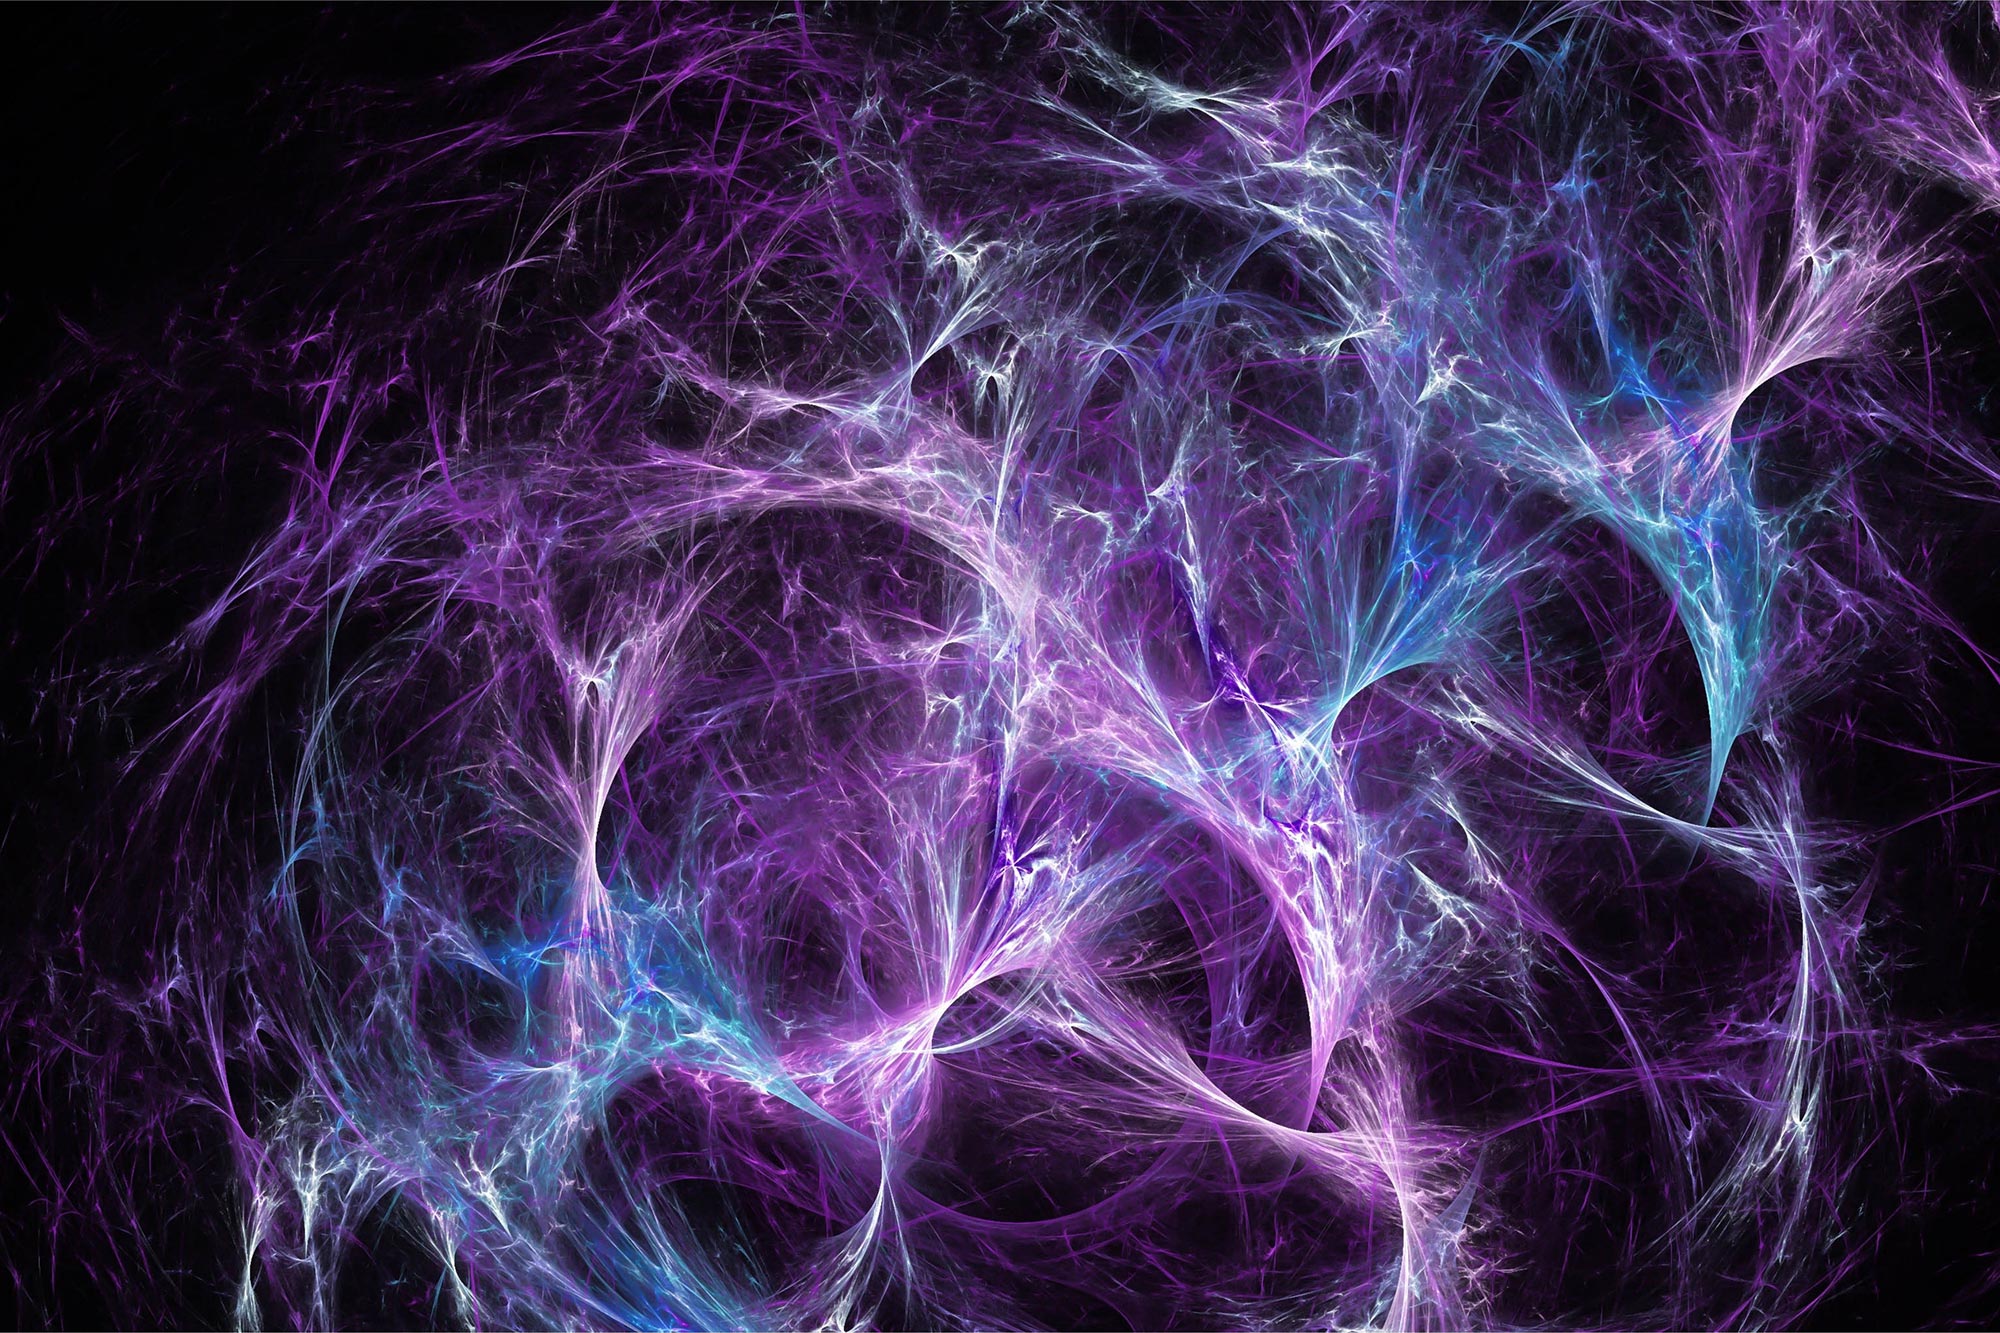 The abstract mystery of dark matter in astrophysics